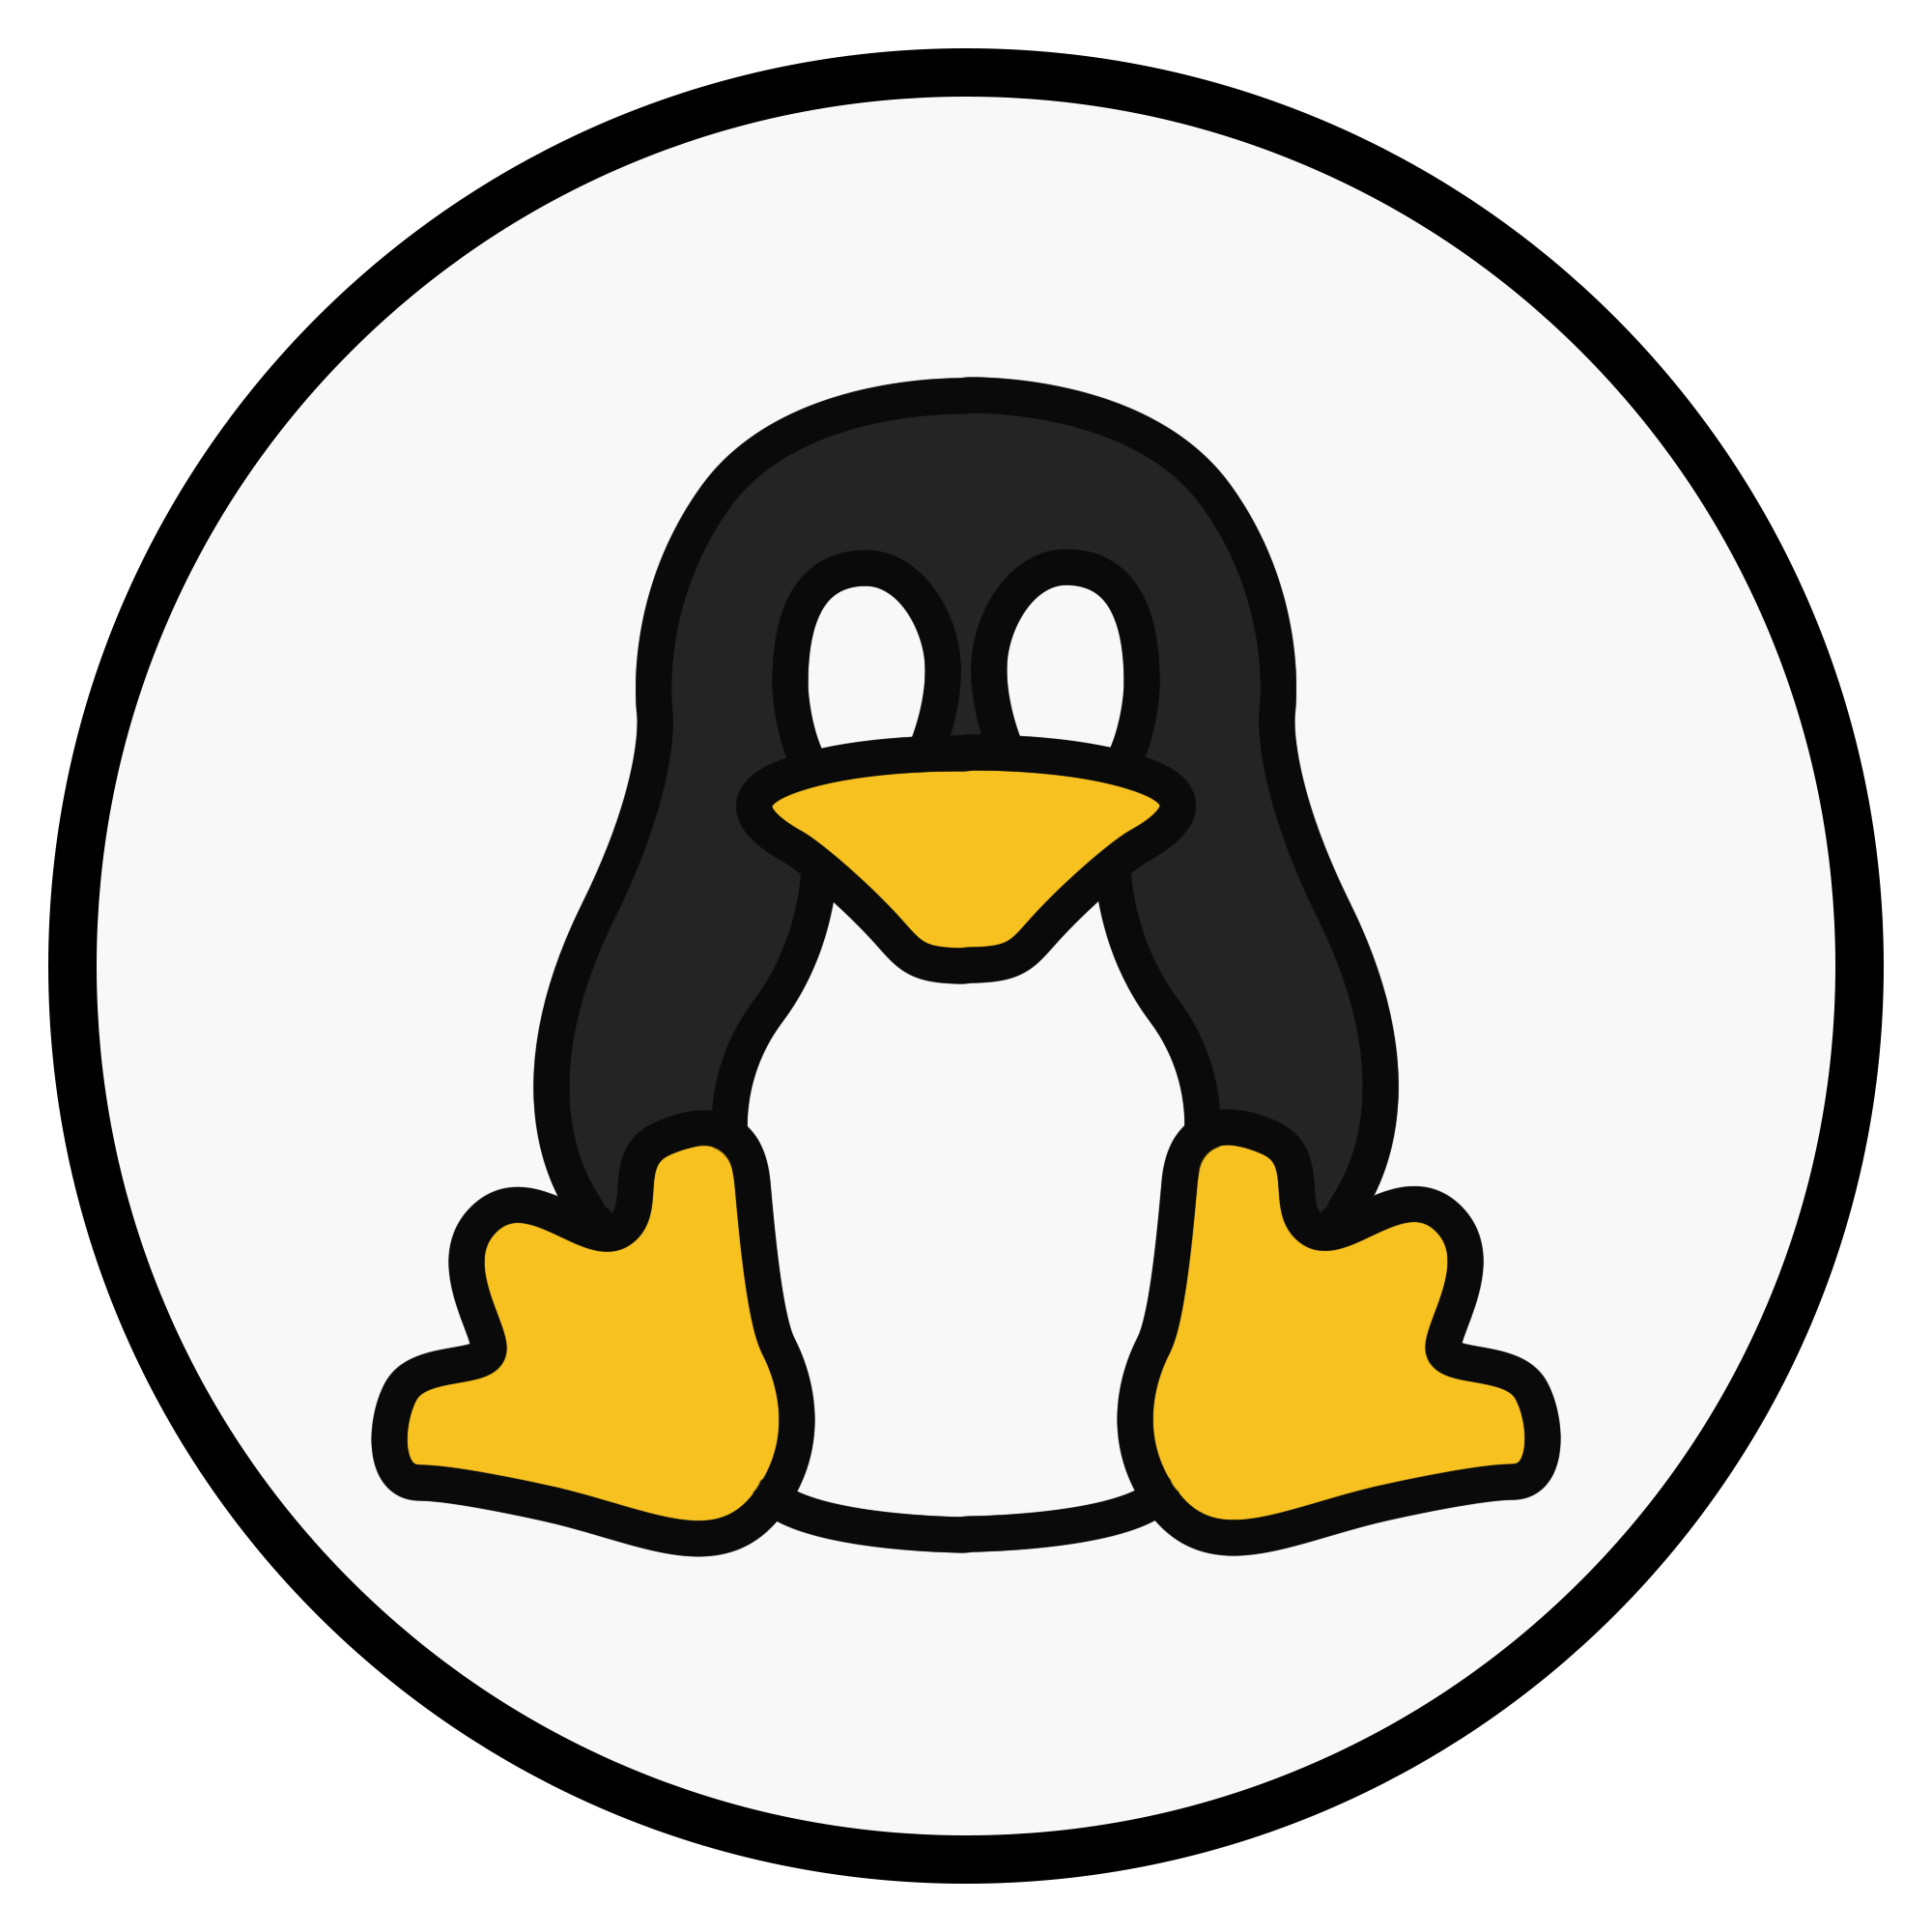 Linux PNG Image